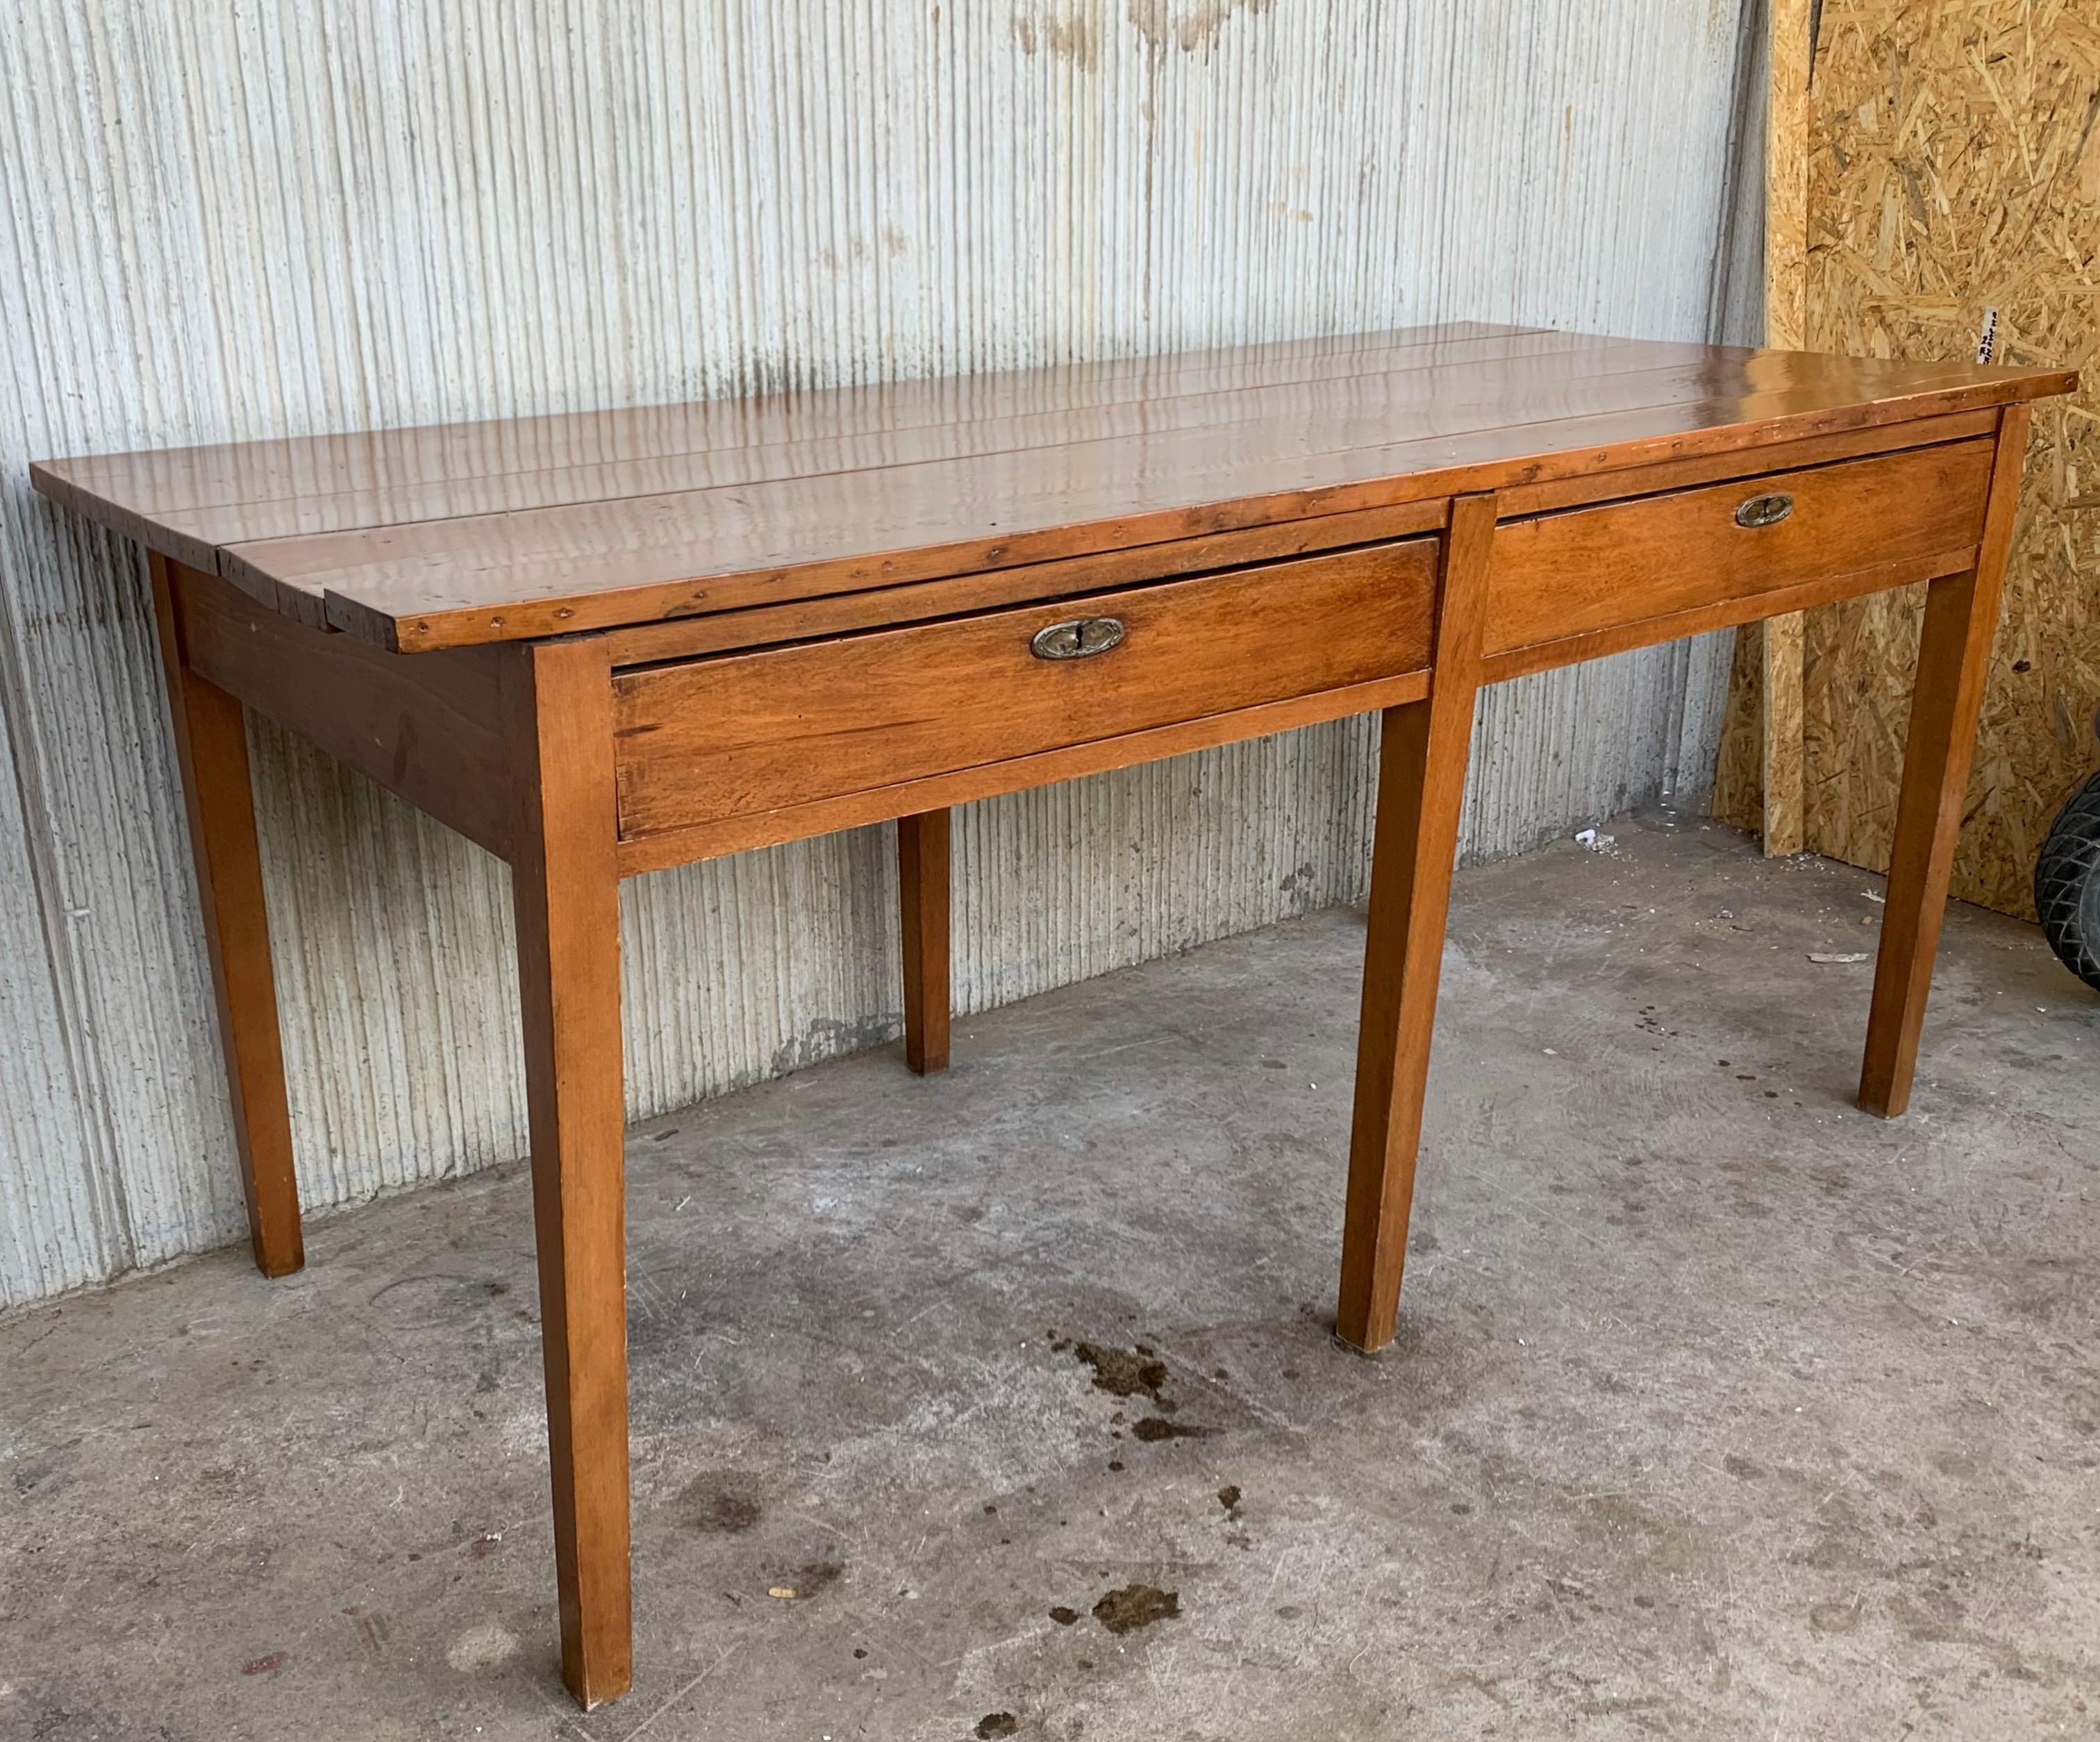 Early 20th Spanish Mobila Country Farm Desk Table or Butcher Block In Good Condition For Sale In Miami, FL